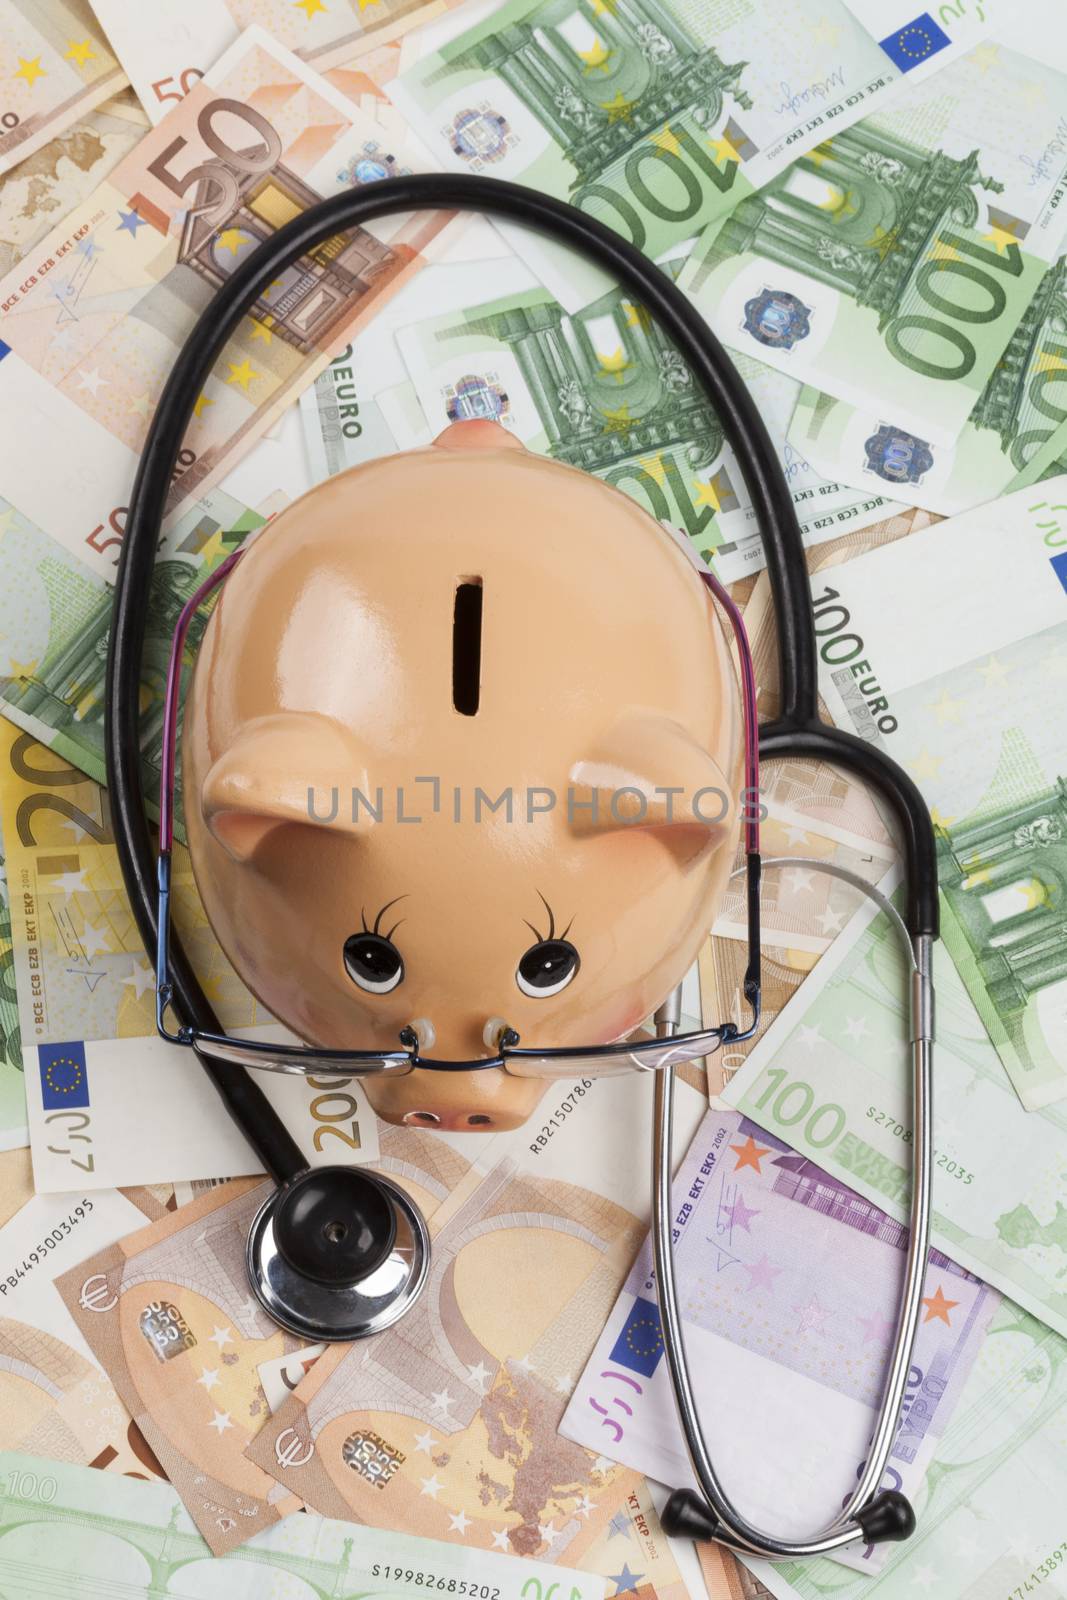 Examin Euros With Stethoscope by orcearo